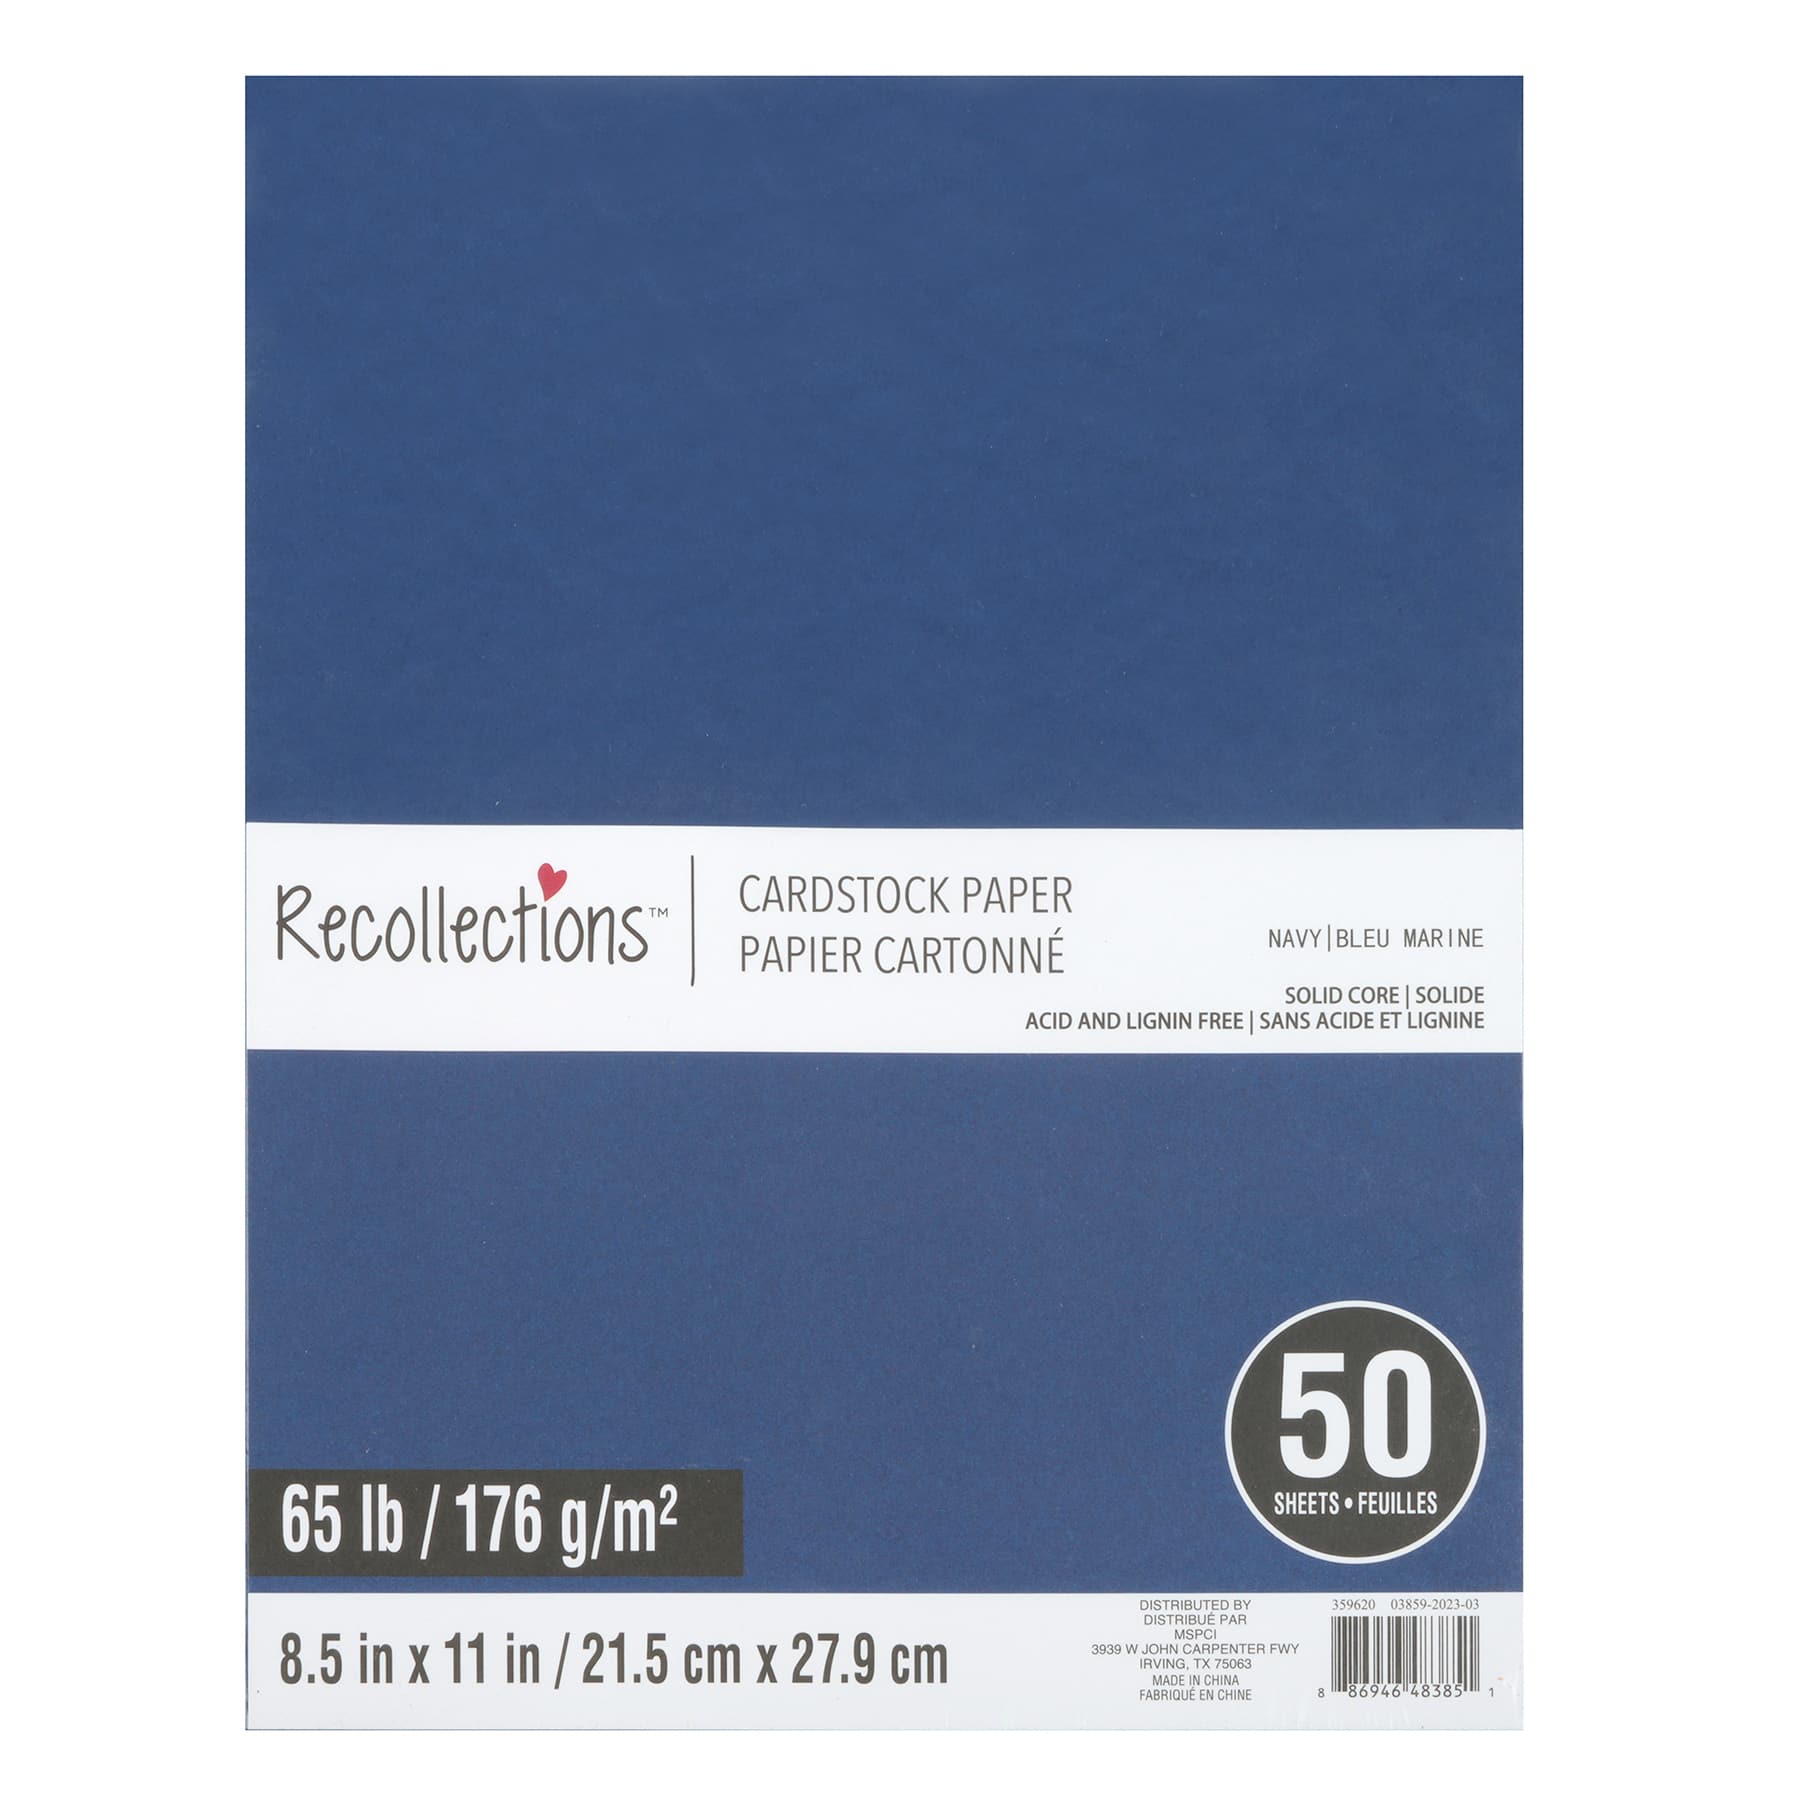 Cape Cod 8.5 x 11 Cardstock Paper by Recollections®, 50 Sheets